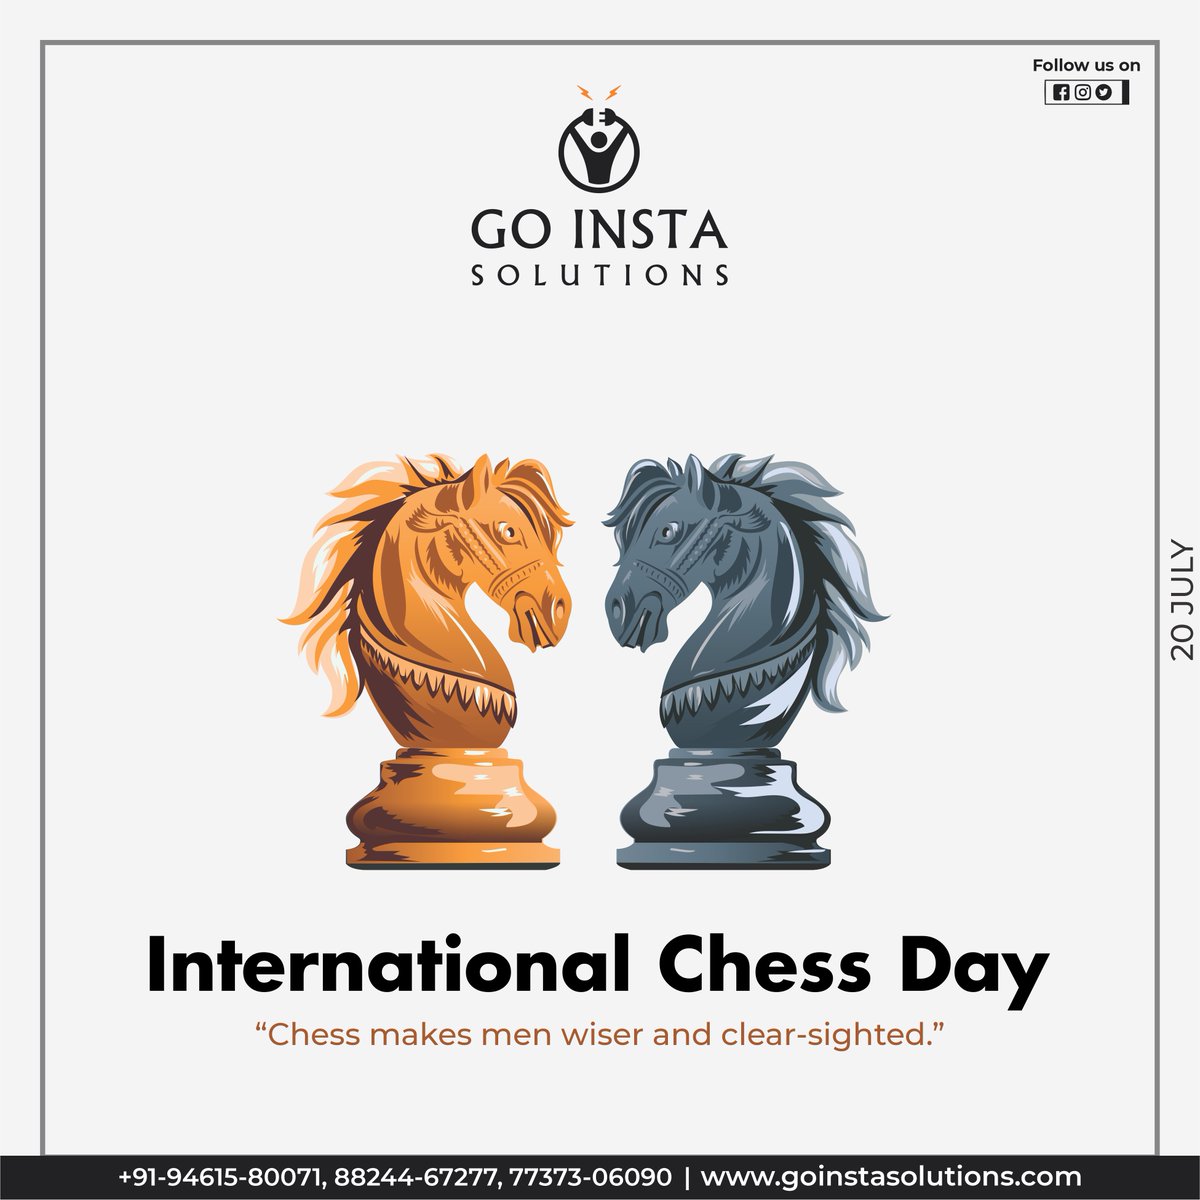 Chess has been used to teach strategy and sharp intellect! 𝐖𝐢𝐬𝐡𝐢𝐧𝐠 𝐲𝐨𝐮 𝐚𝐥𝐥 𝐇𝐚𝐩𝐩𝐲 '𝐈𝐧𝐭𝐞𝐫𝐧𝐚𝐭𝐢𝐨𝐧𝐚𝐥 𝐂𝐡𝐞𝐬𝐬 𝐝𝐚𝐲'!

#internationalchessday #internationalchessday2021 #chessplayers #chesslovers #chessenthusiasts #socialitdesigns #goinstasolutions